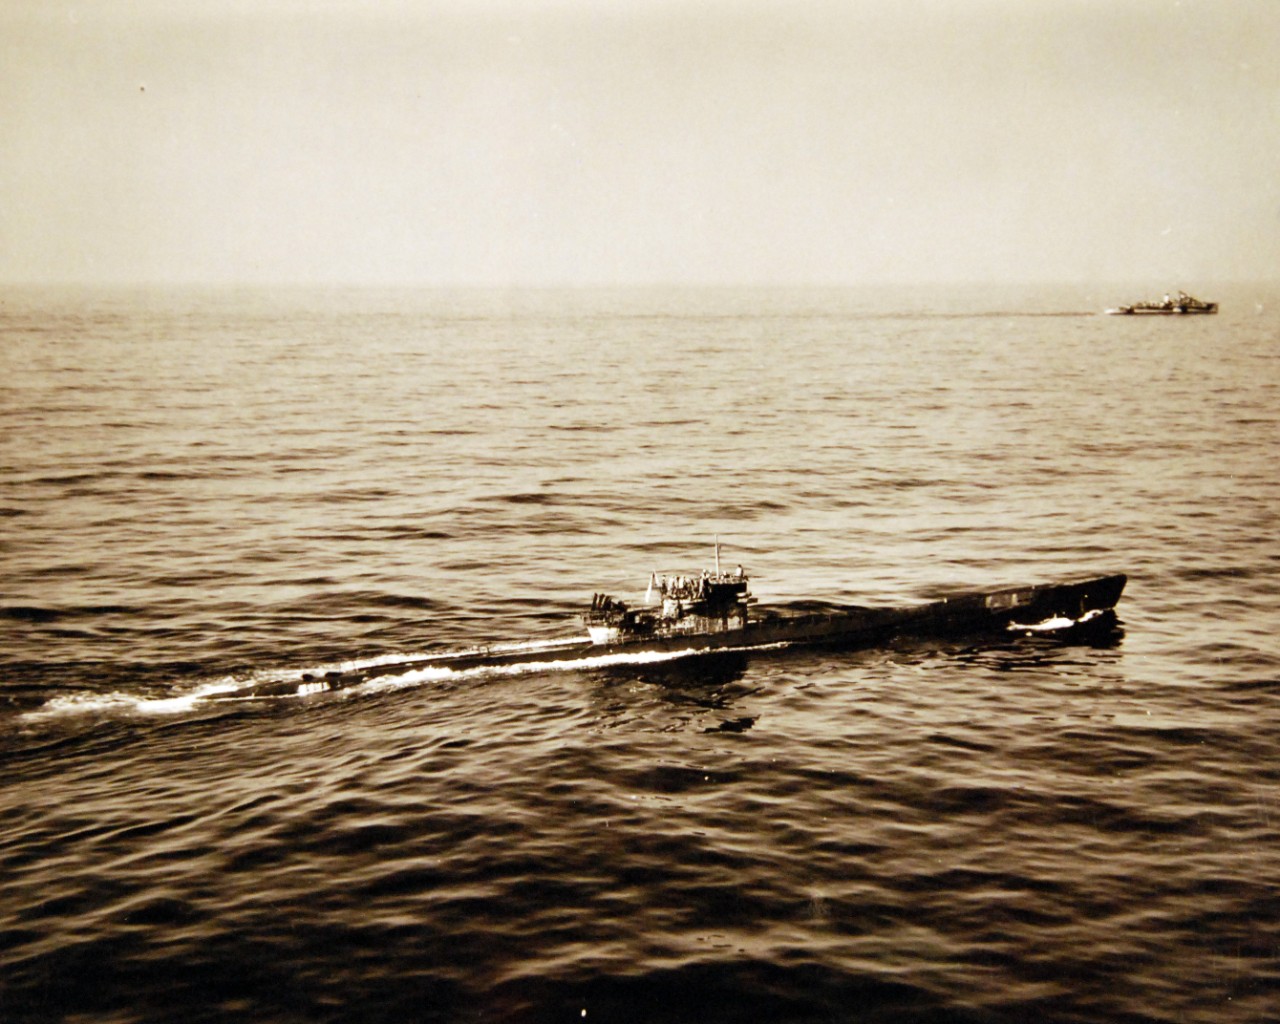 80-G-320305: Surrender of German U-boats, WWII.  Surrender of German U-boat, U-858, 700 miles off the New England Coast to two destroyer escorts, May 10, 1945.  Shown:  U-858 arrives at the point of rendezvous flying U.S. colors.  In the background is one of the Des which escorted the submarine.  Official U.S. Navy Photograph, now in the collections of the National Archives.  (2017/07/18).